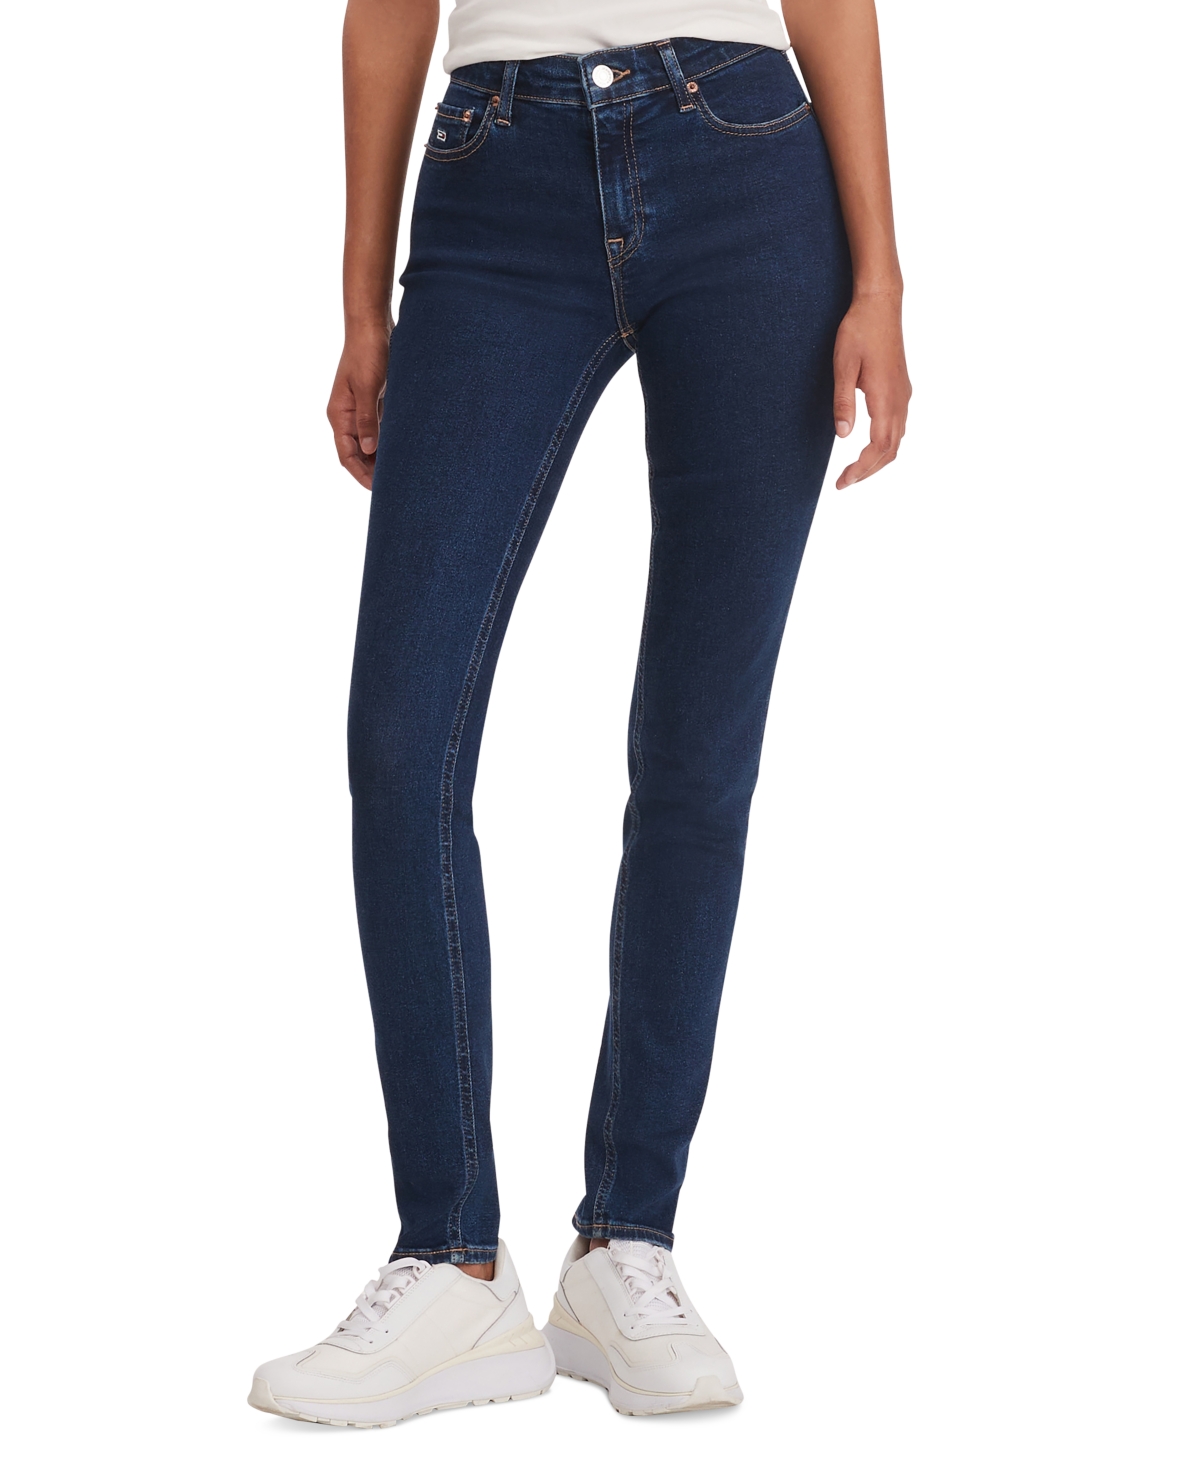 Women's Nora Mid Rise Skinny-Leg Jeans - New Niceville Mid Blue Stretch